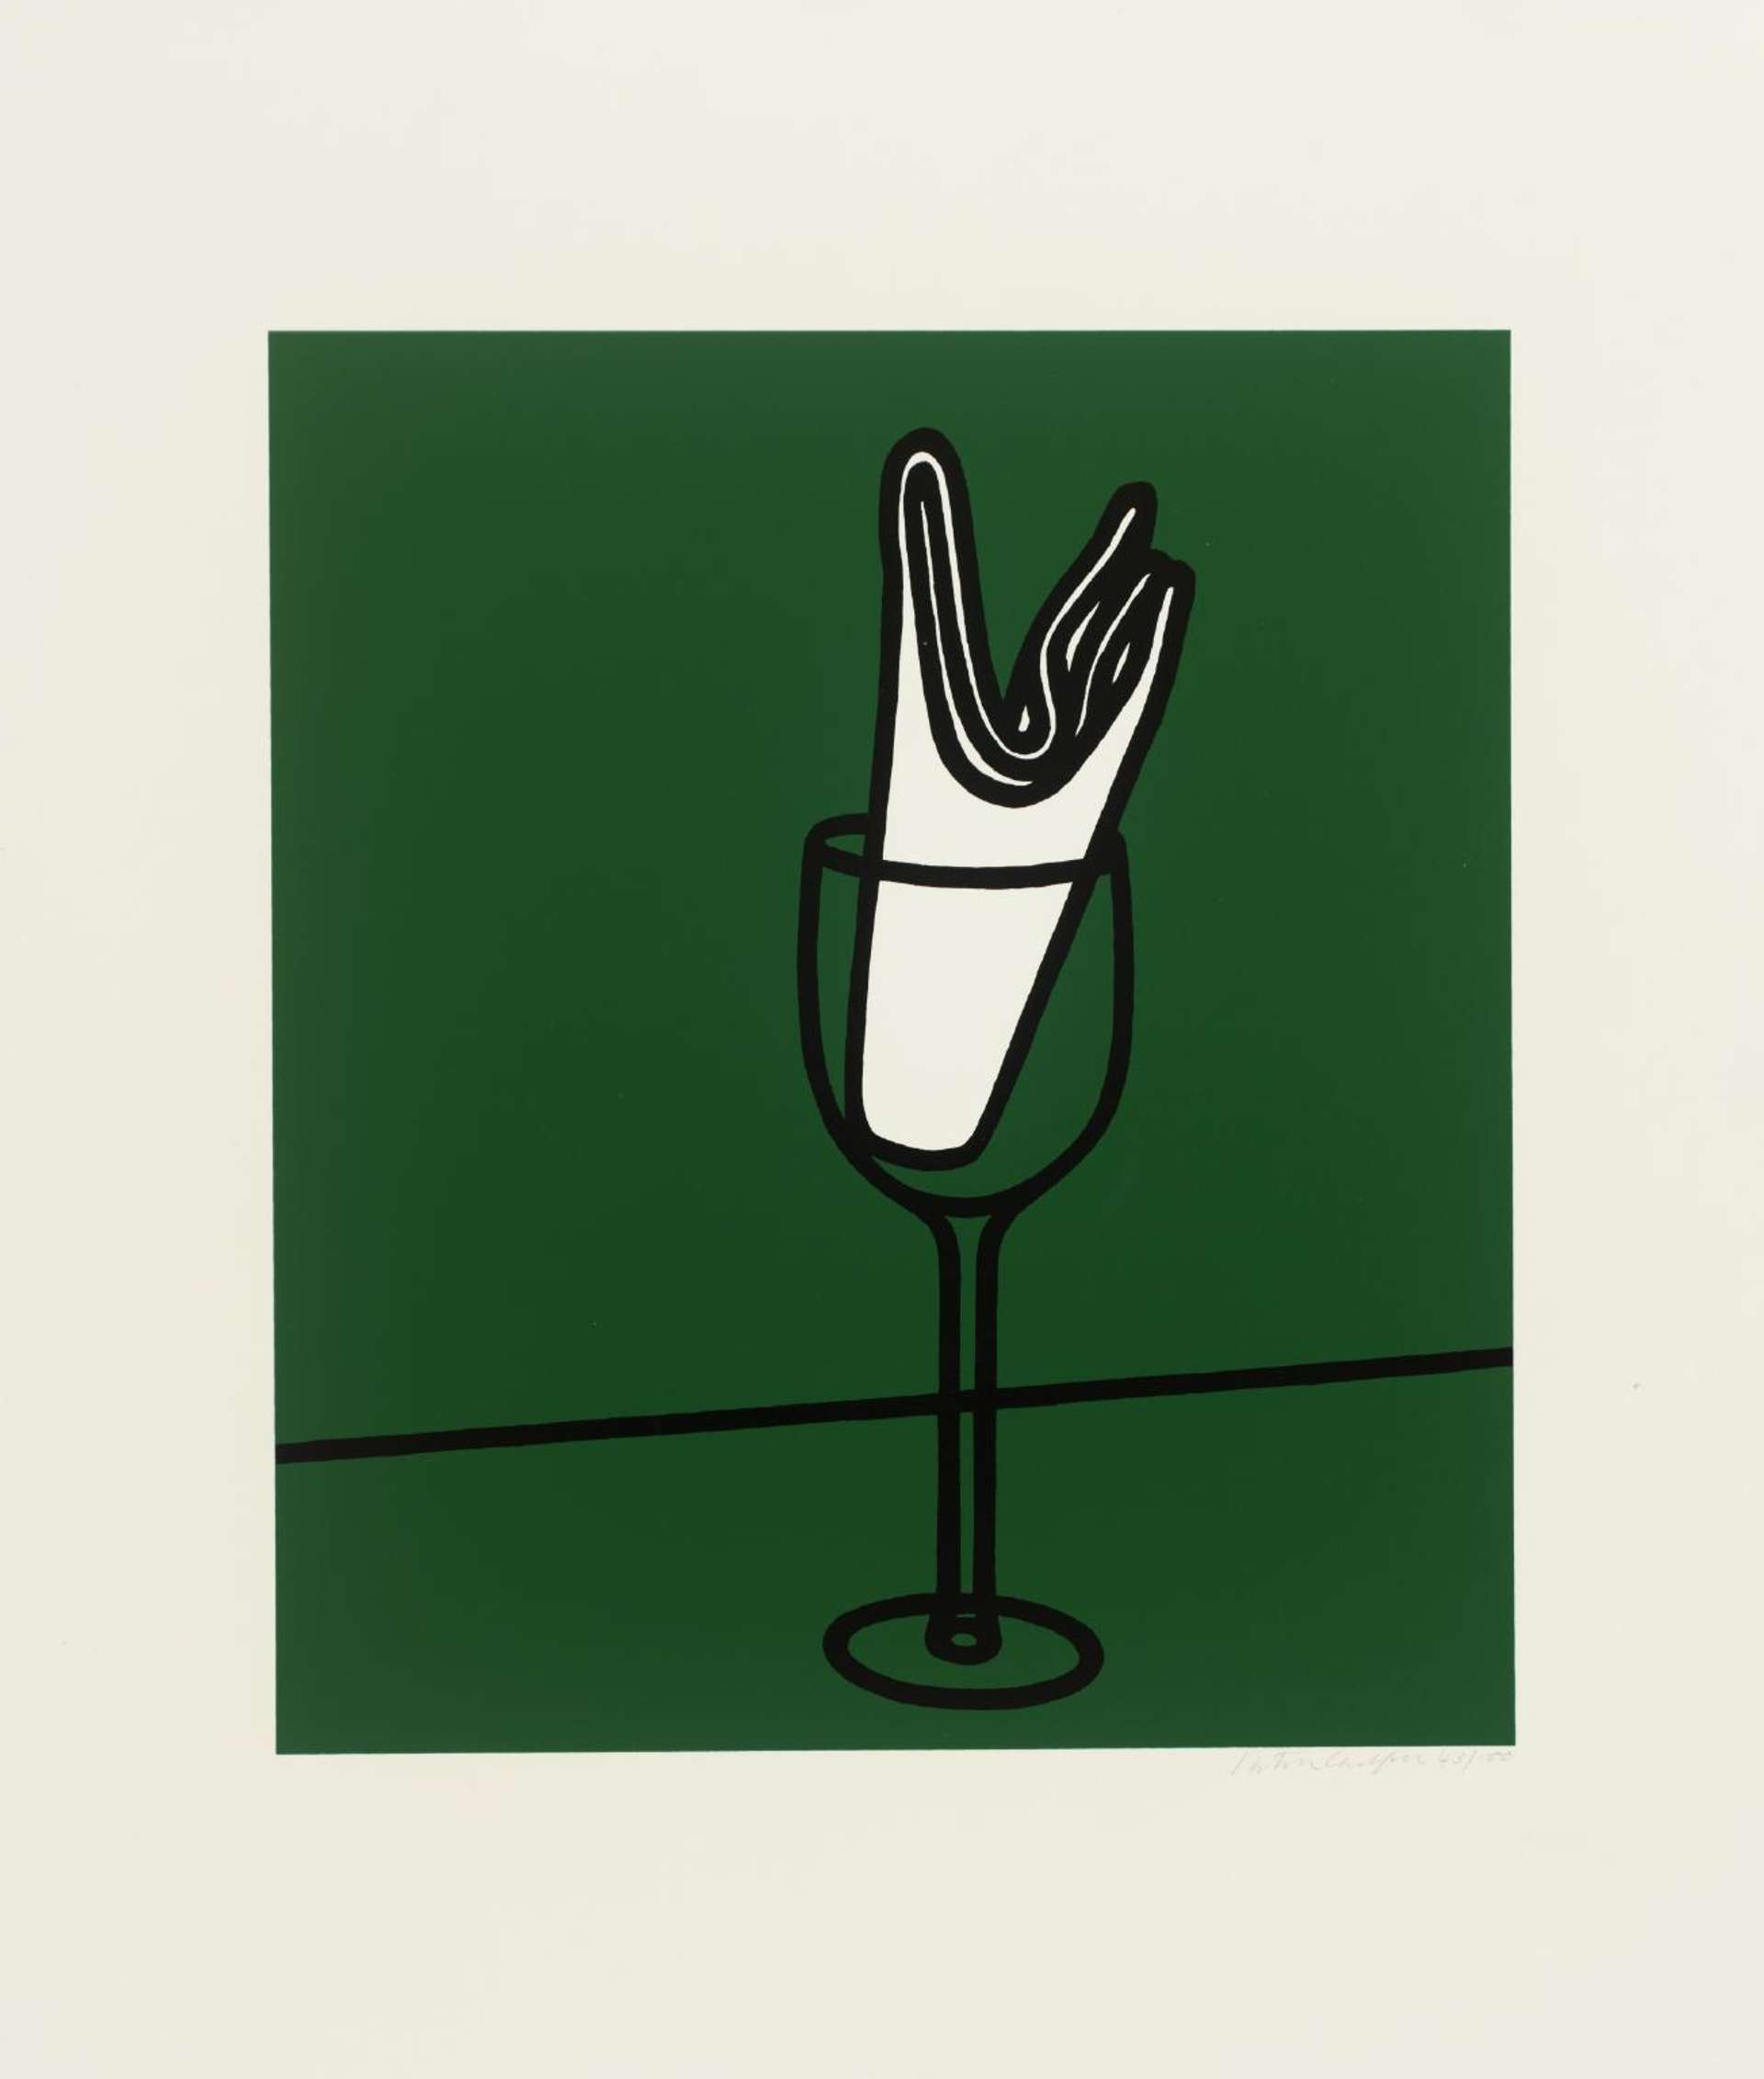  An printed image by the artist Patrick Caulfield, which shows the outline of a wine glass with a white handkerchief inside, against a green background.